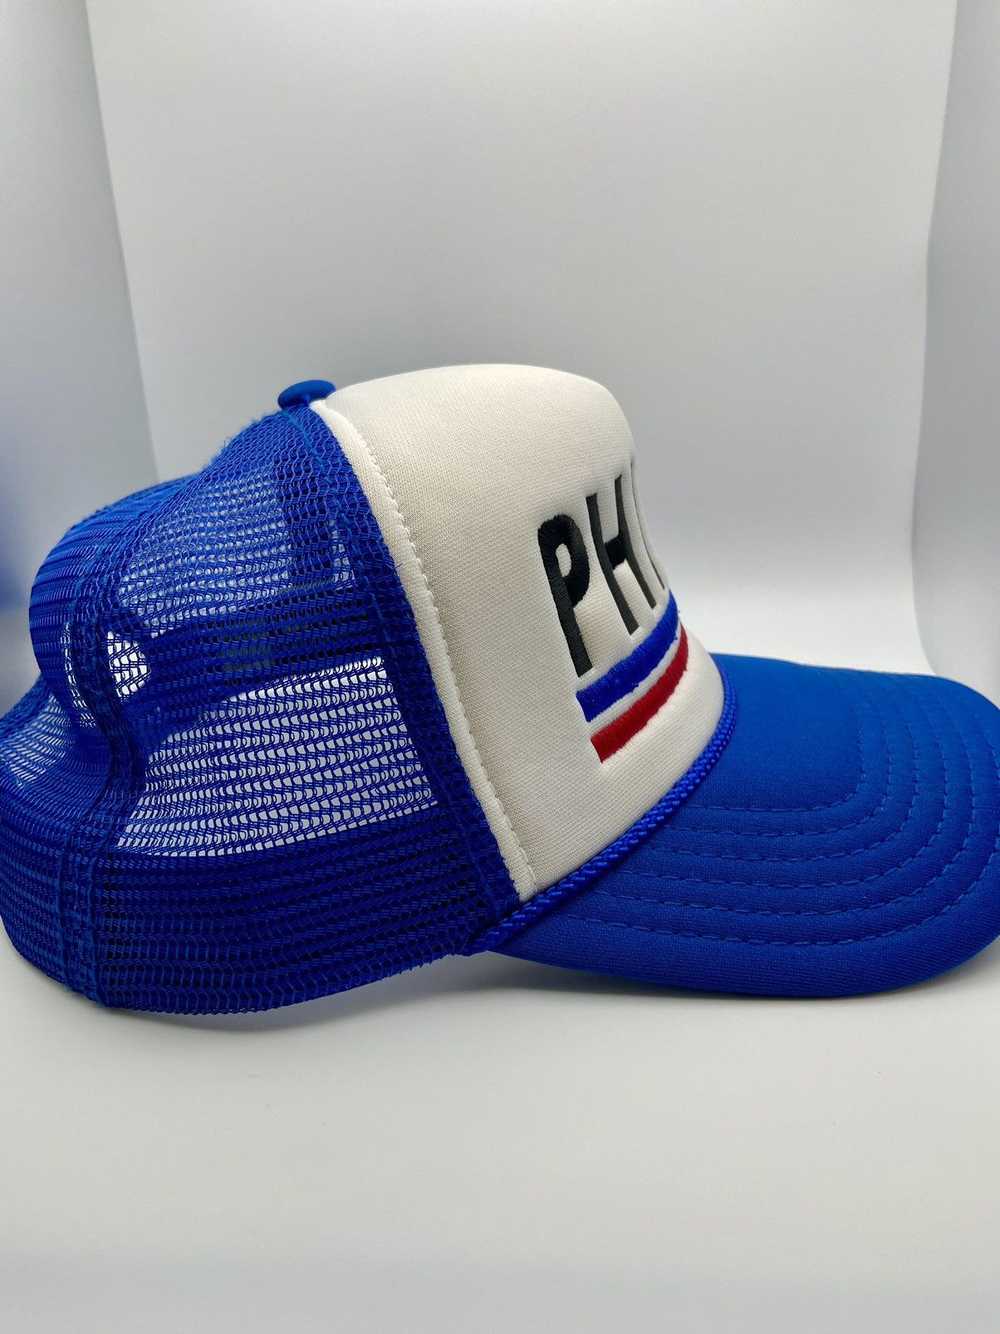 Other Trucker Hat - “Philly” - SnapBack Classic - image 6